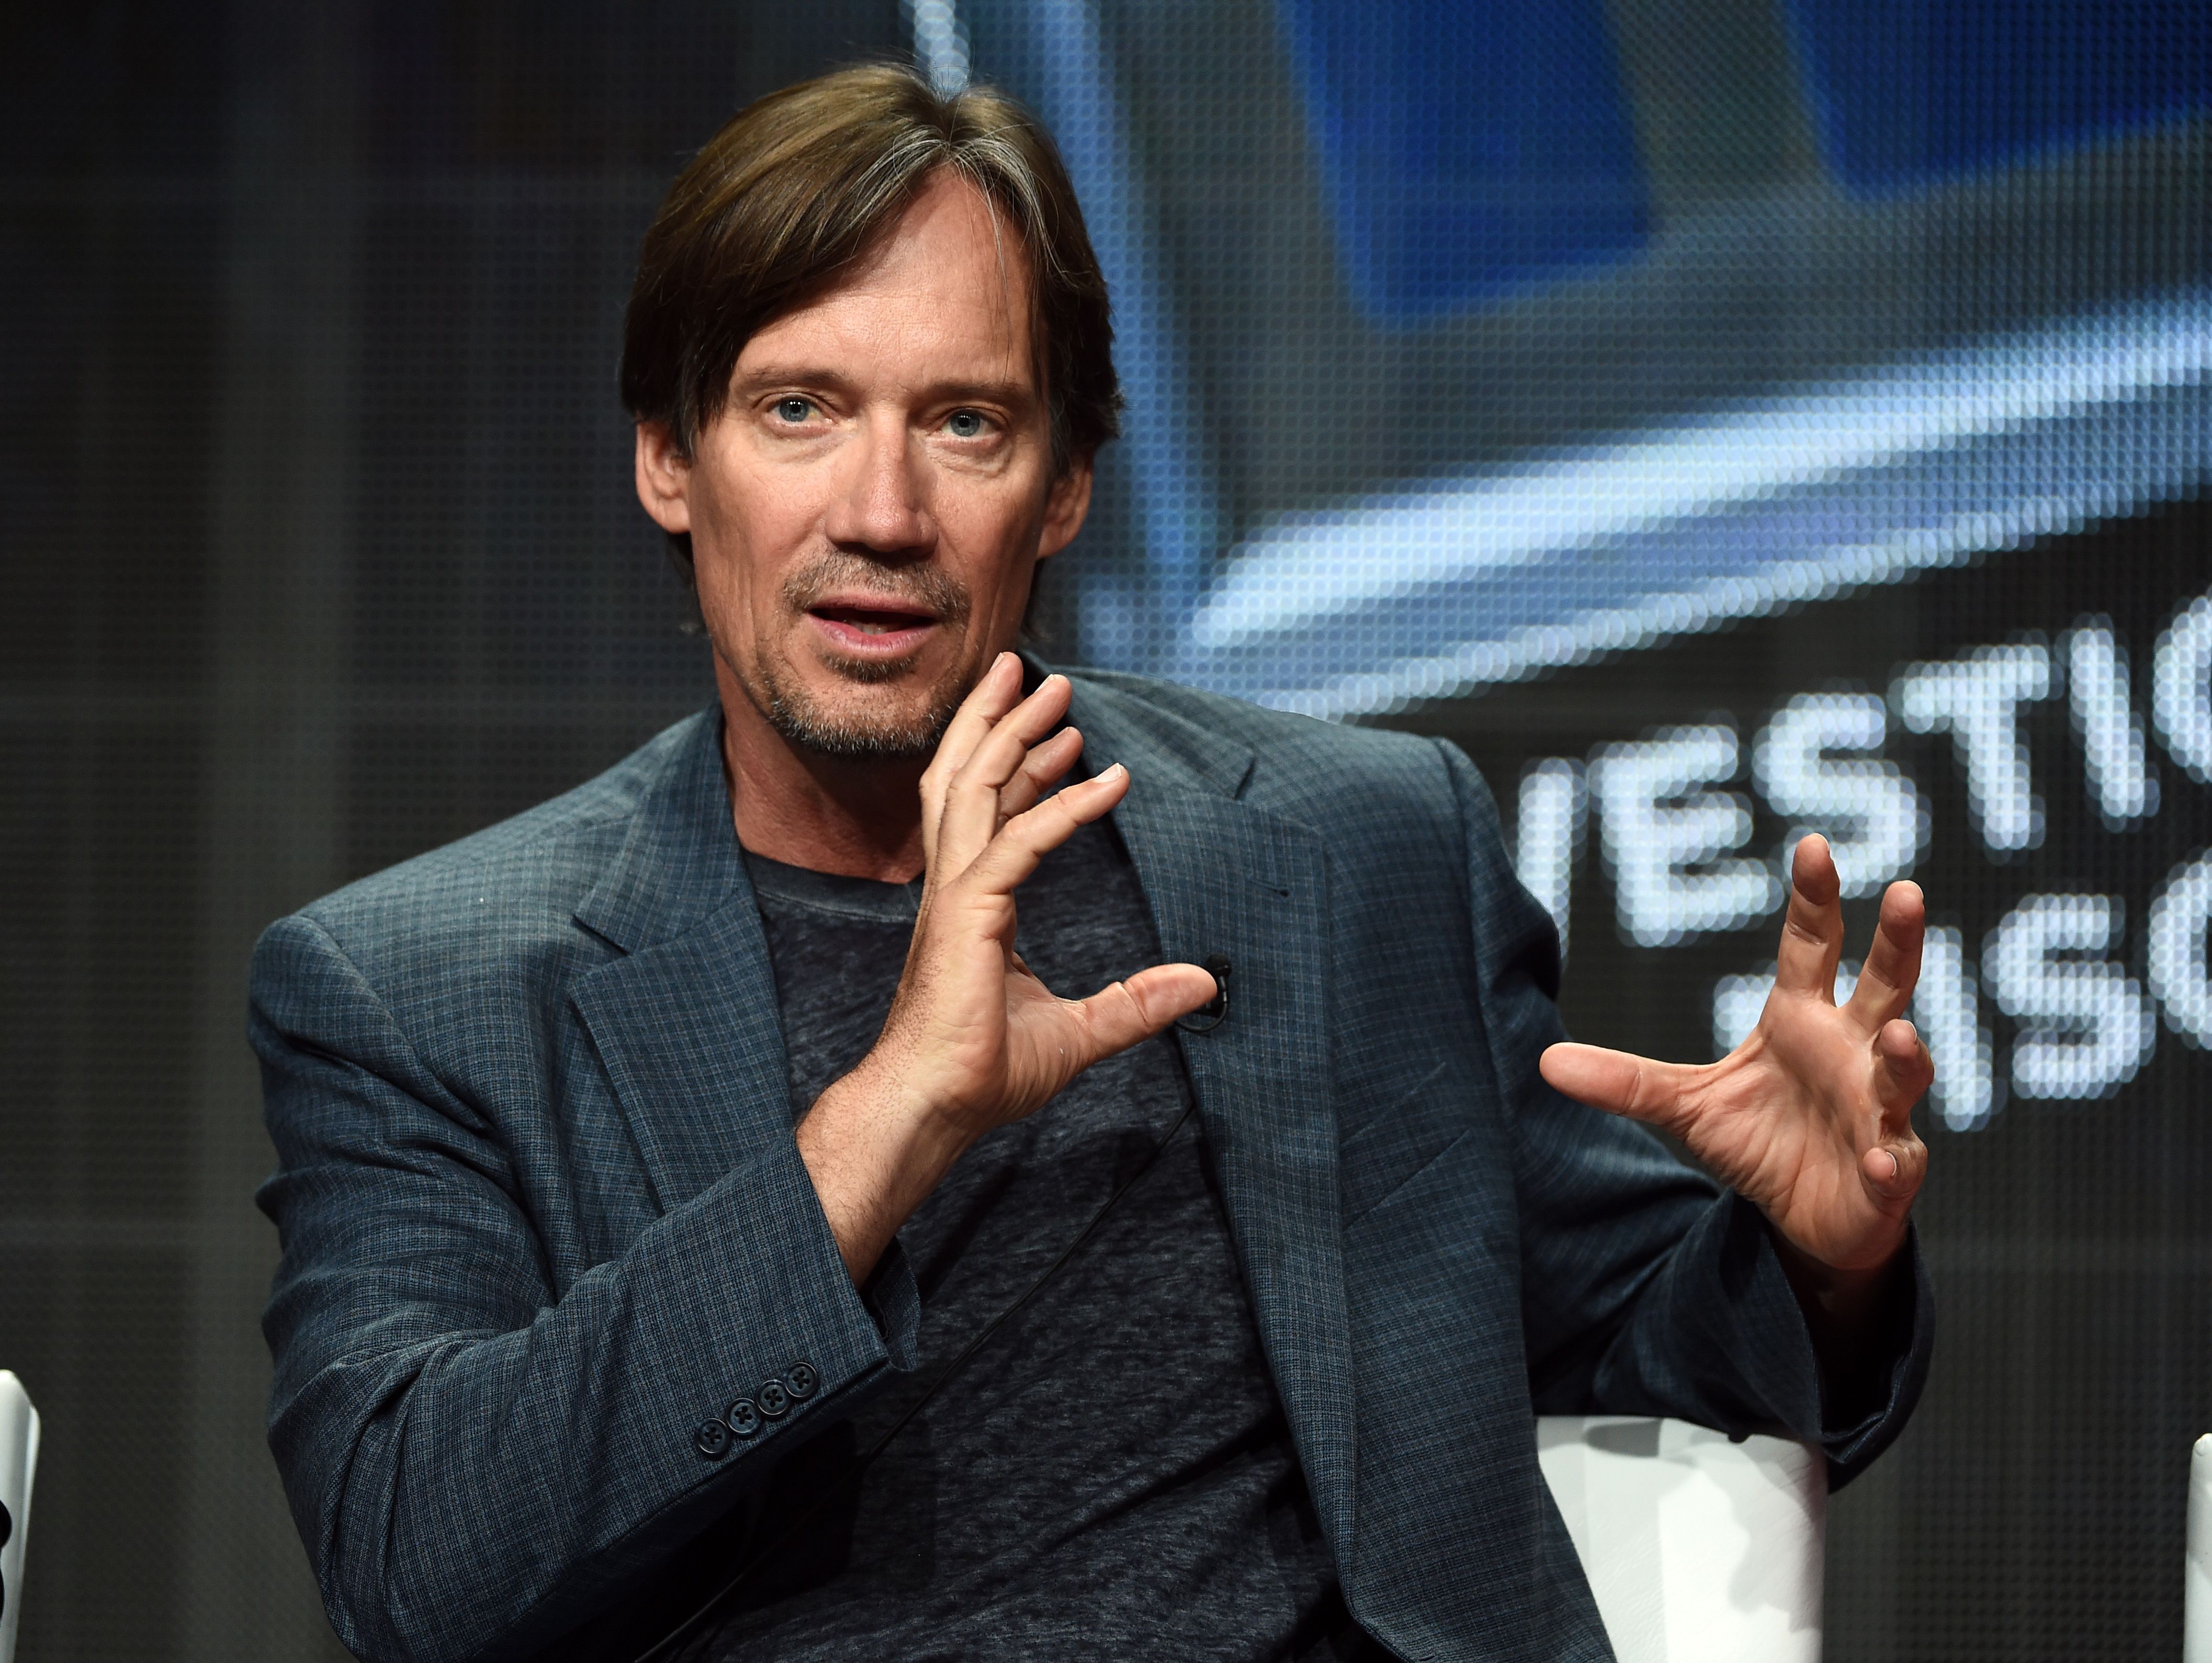 Kevin Sorbo speaks at an event.